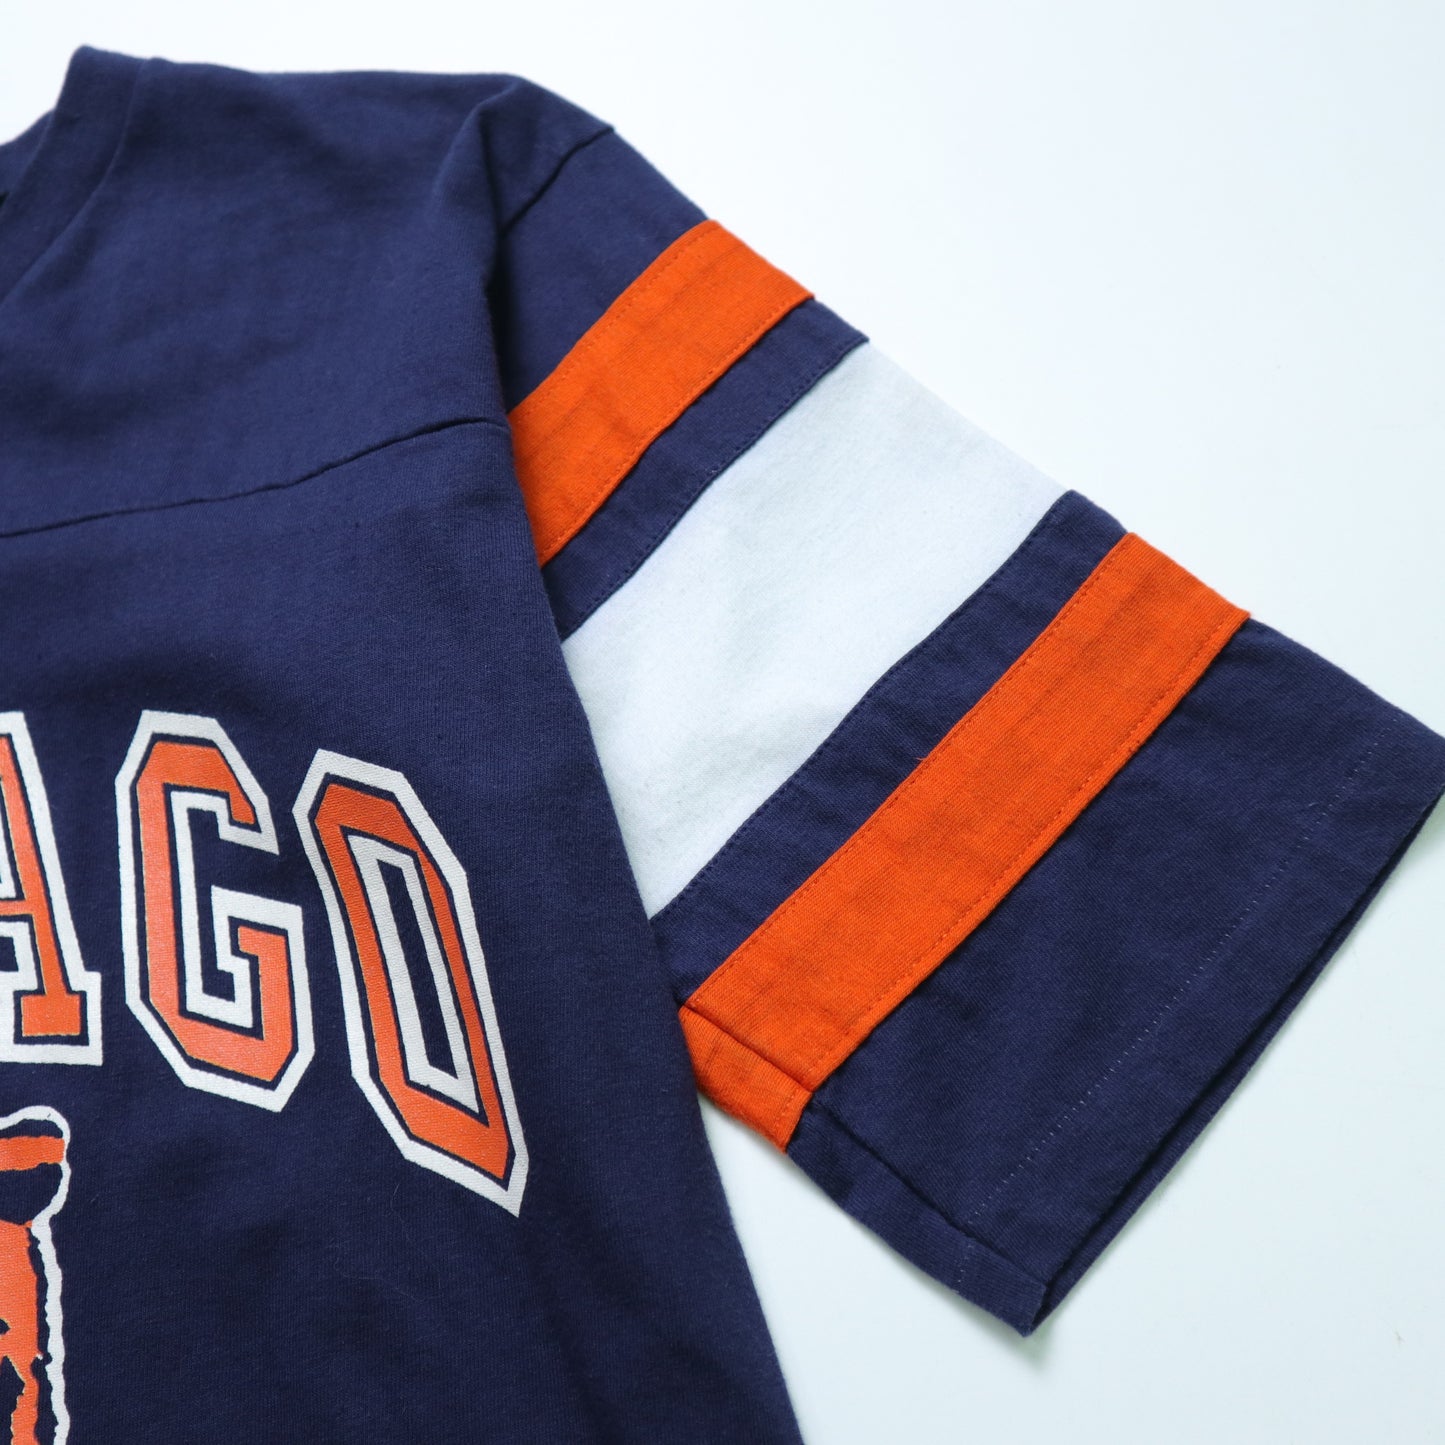 80s American made Chicago Bears football top